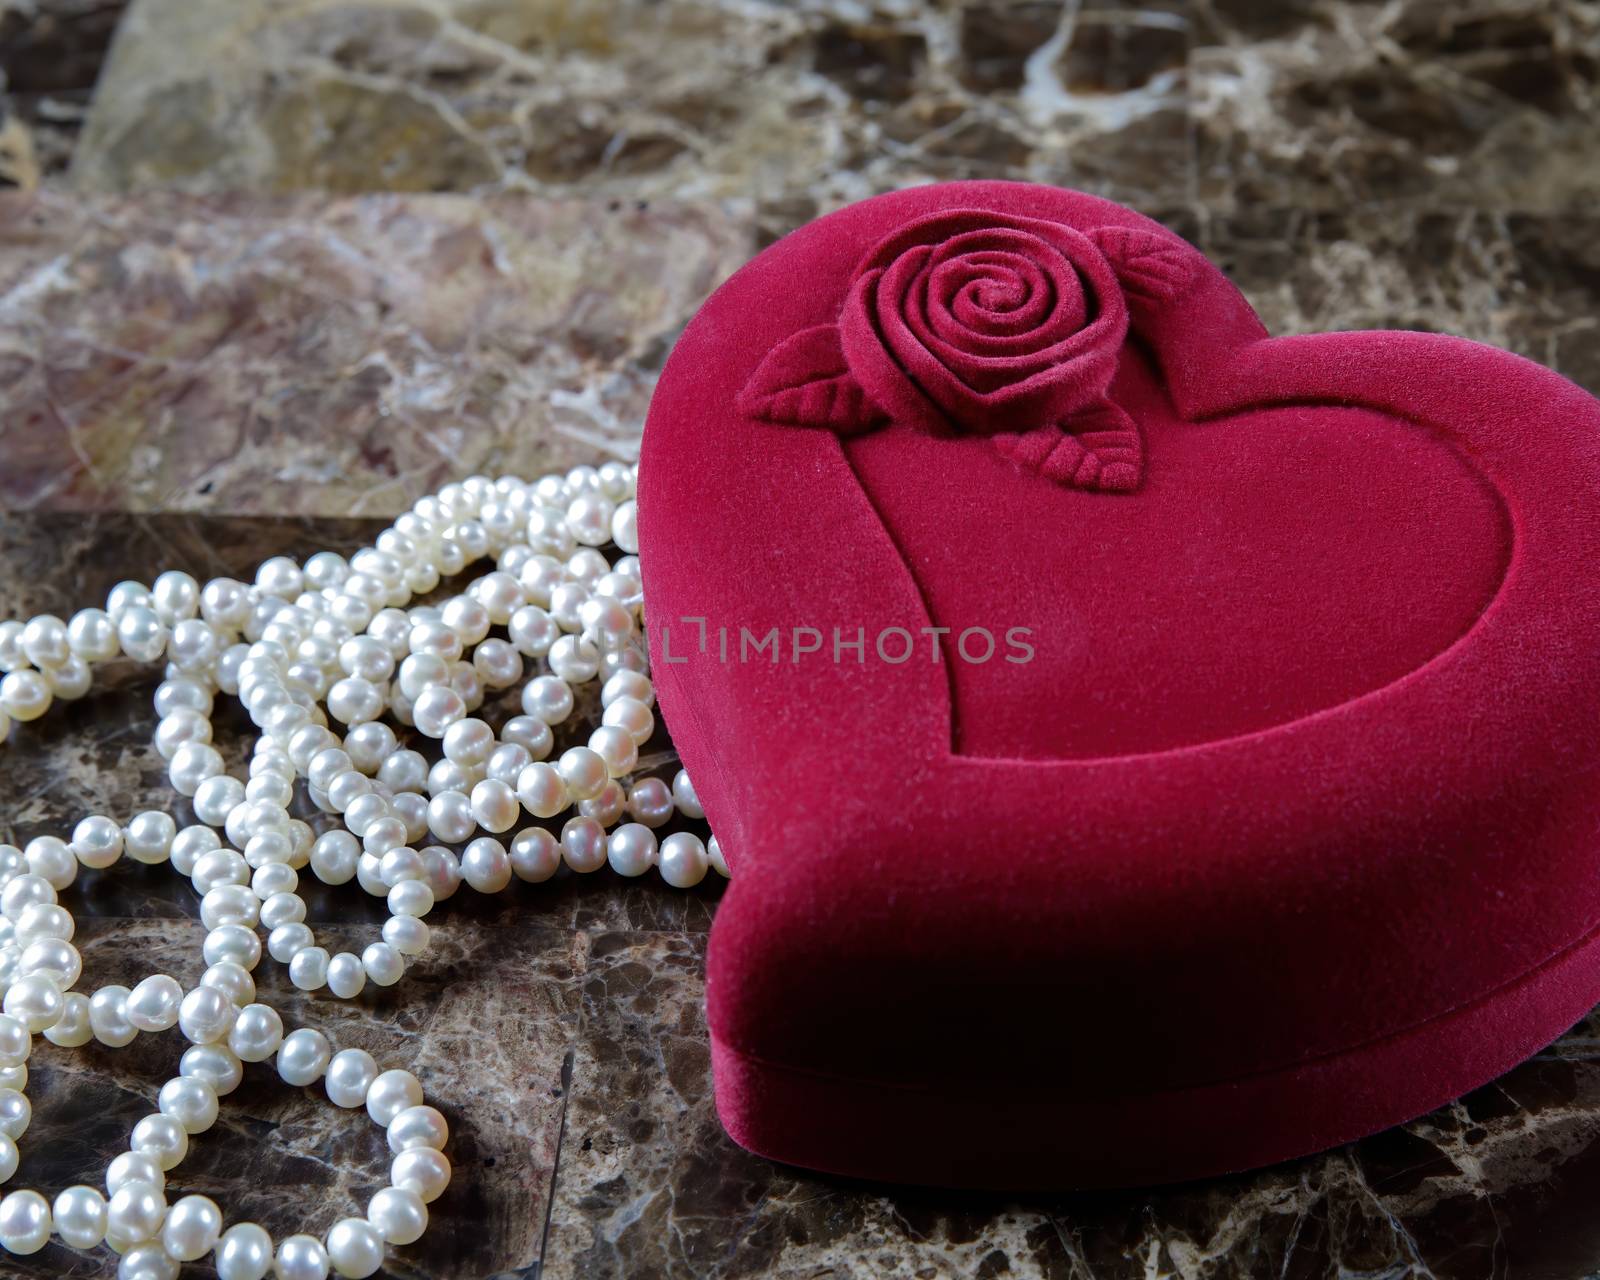 Pearl necklace in a red heart-shaped gift box on a marble background. Close-up. Happy birthday or mother's day. A romantic gift for Valentine's Day or for a wedding